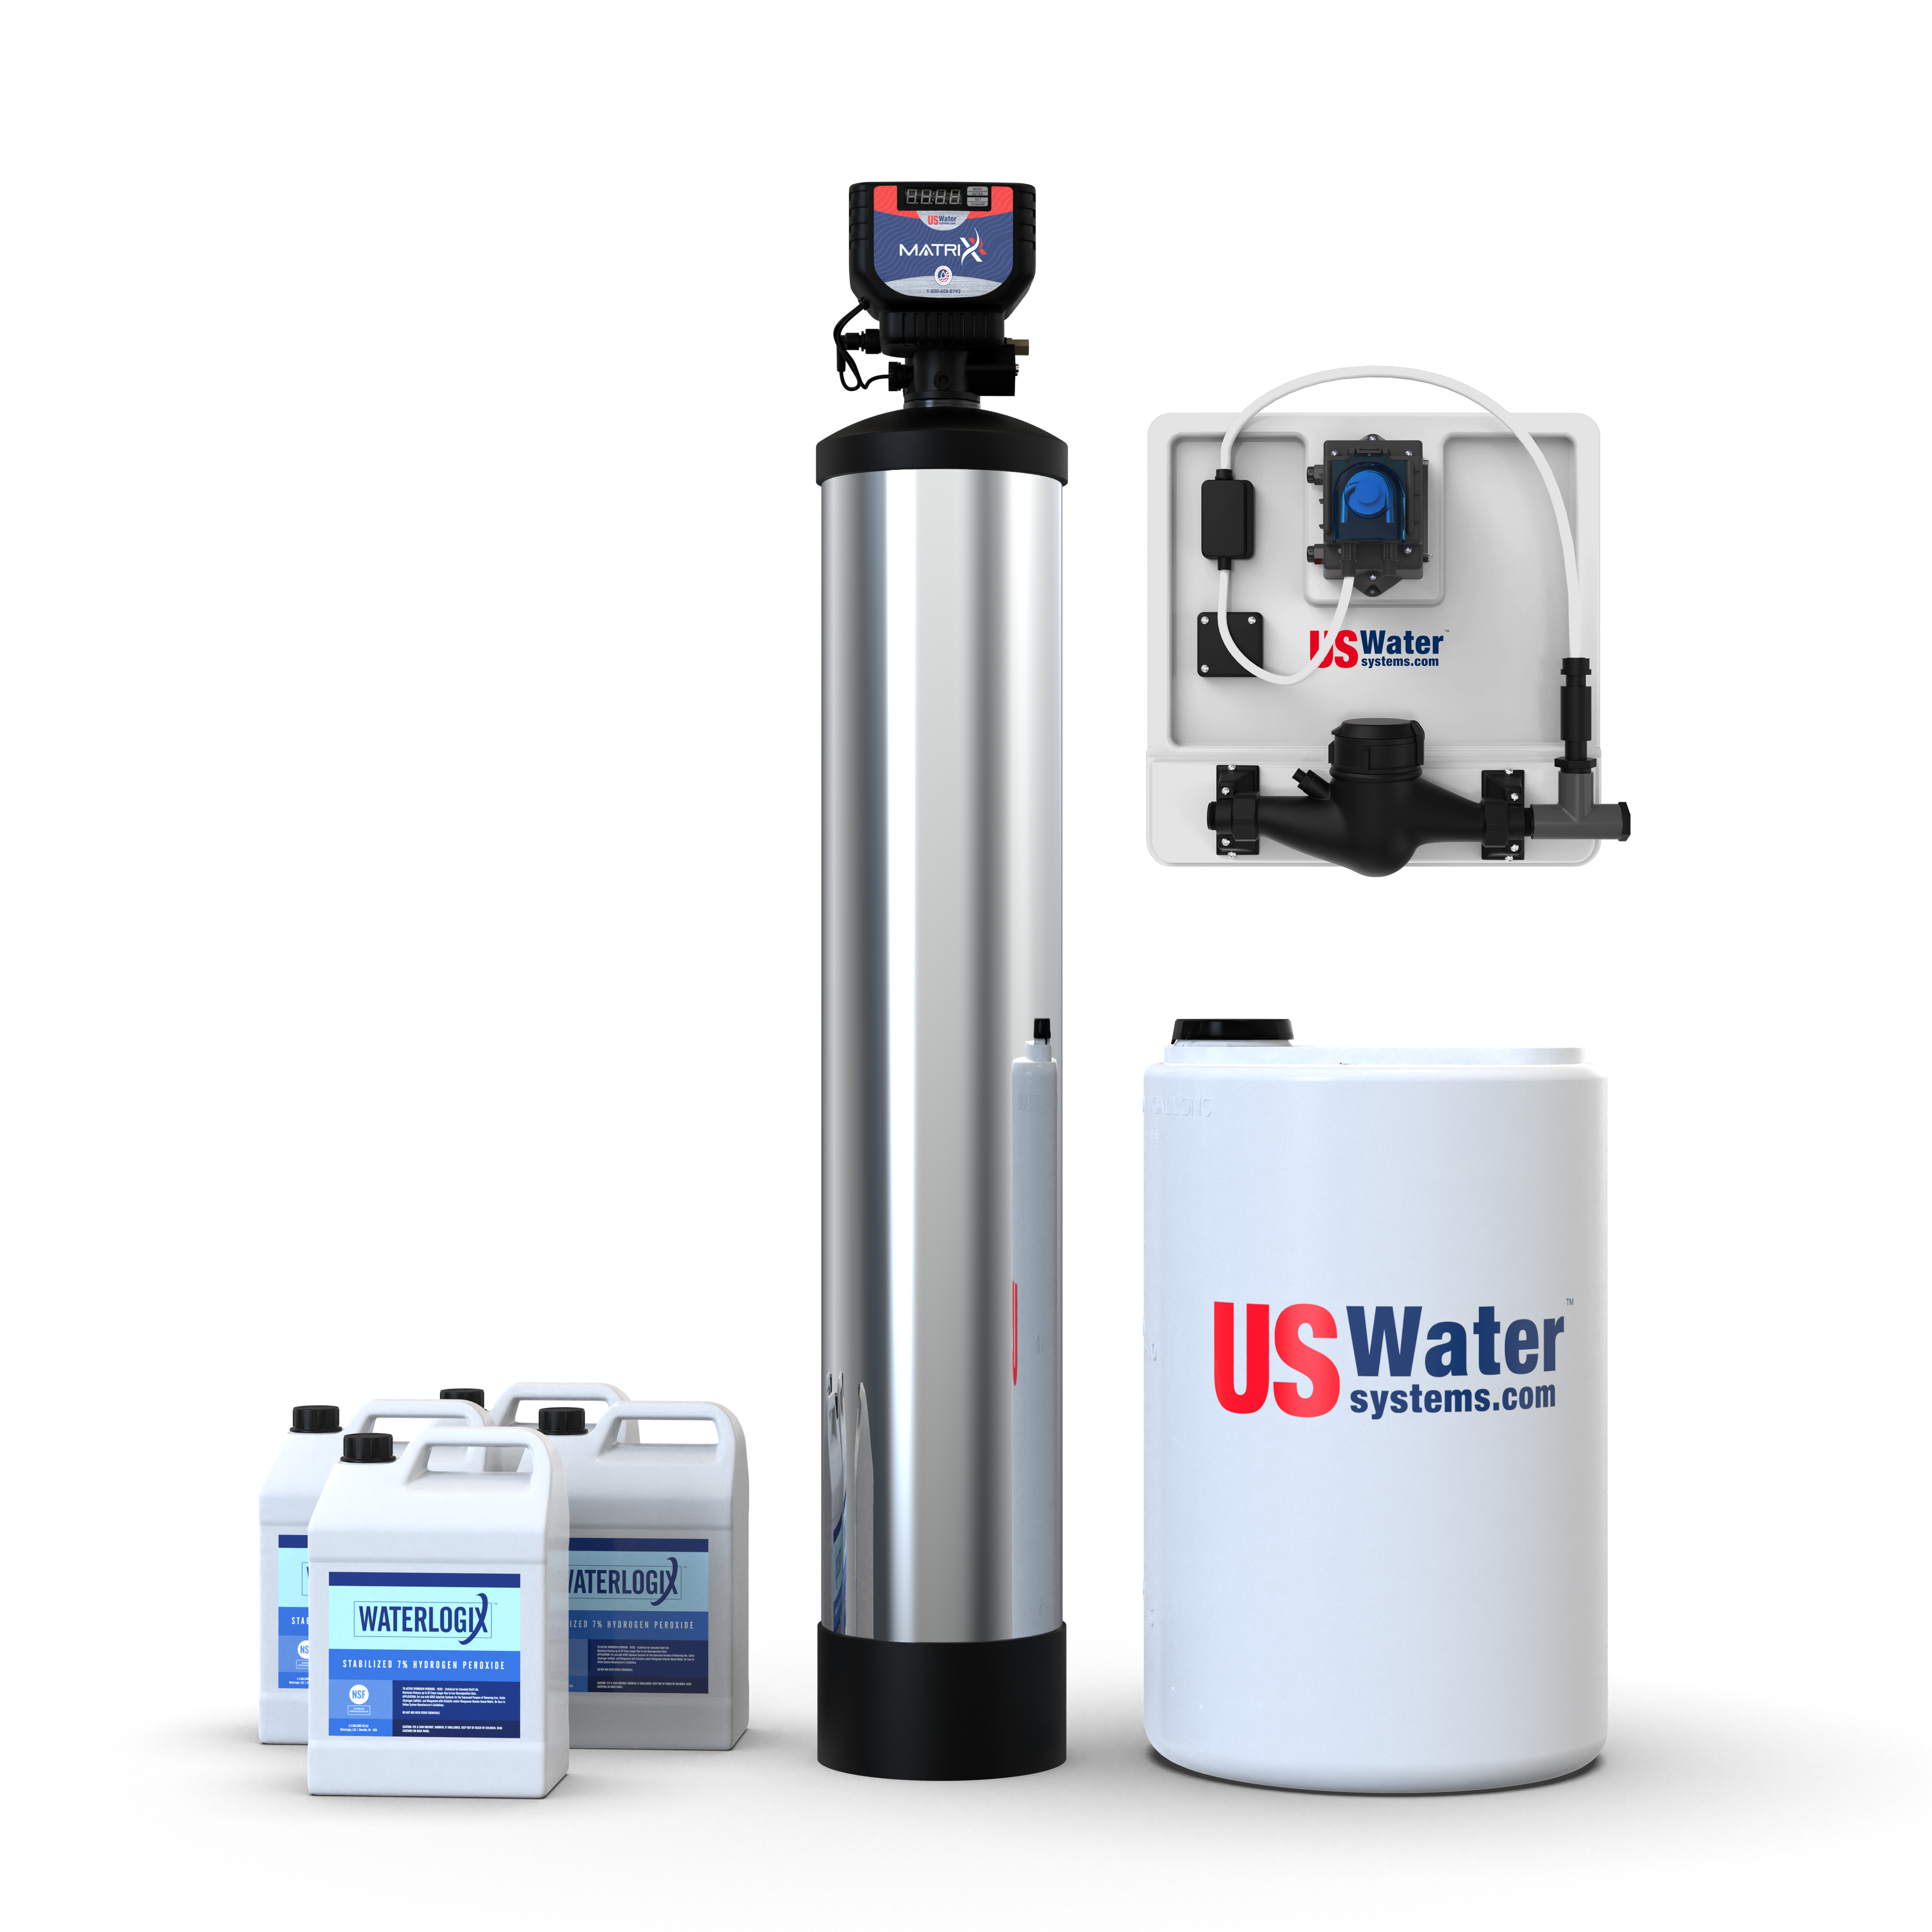 Matrixx inFusion - Iron And Sulfur Removal System | US Water Systems